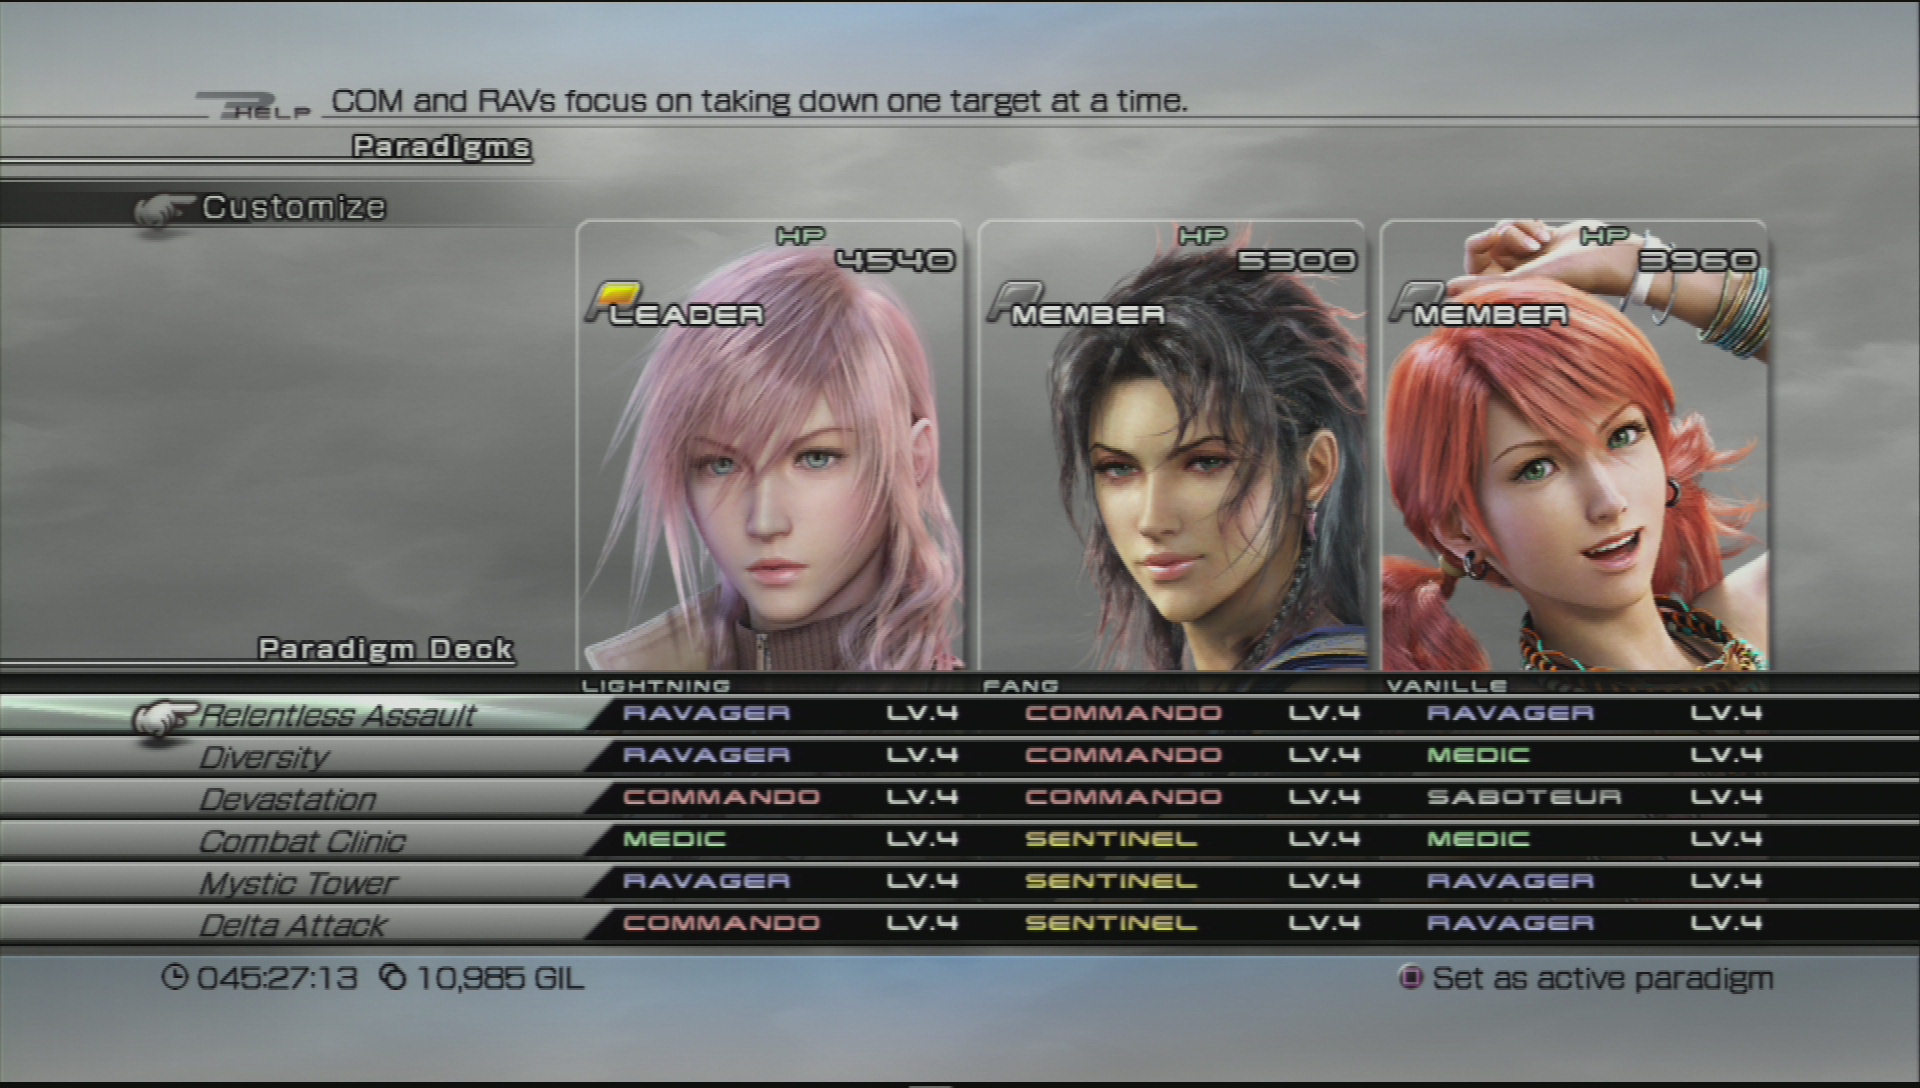 Showing a full Paradigm Deck in Final Fantasy XIII